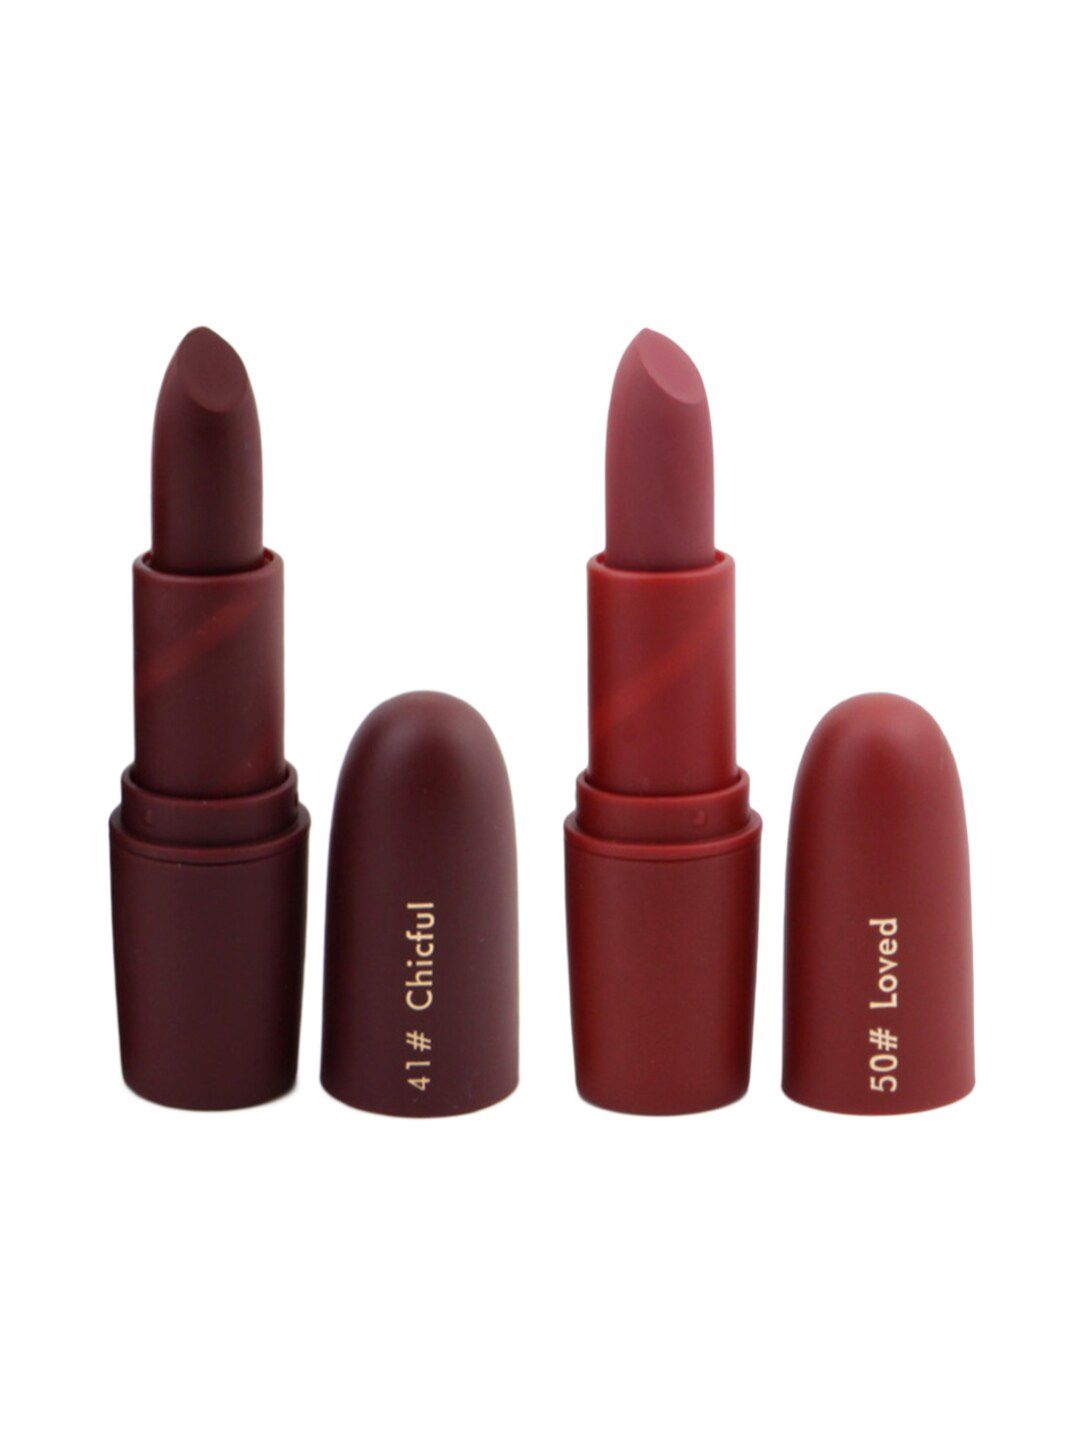 MISS ROSE Set of 2 Matte Creamy Lipsticks - Chicful 41 & Loved 50 Price in India